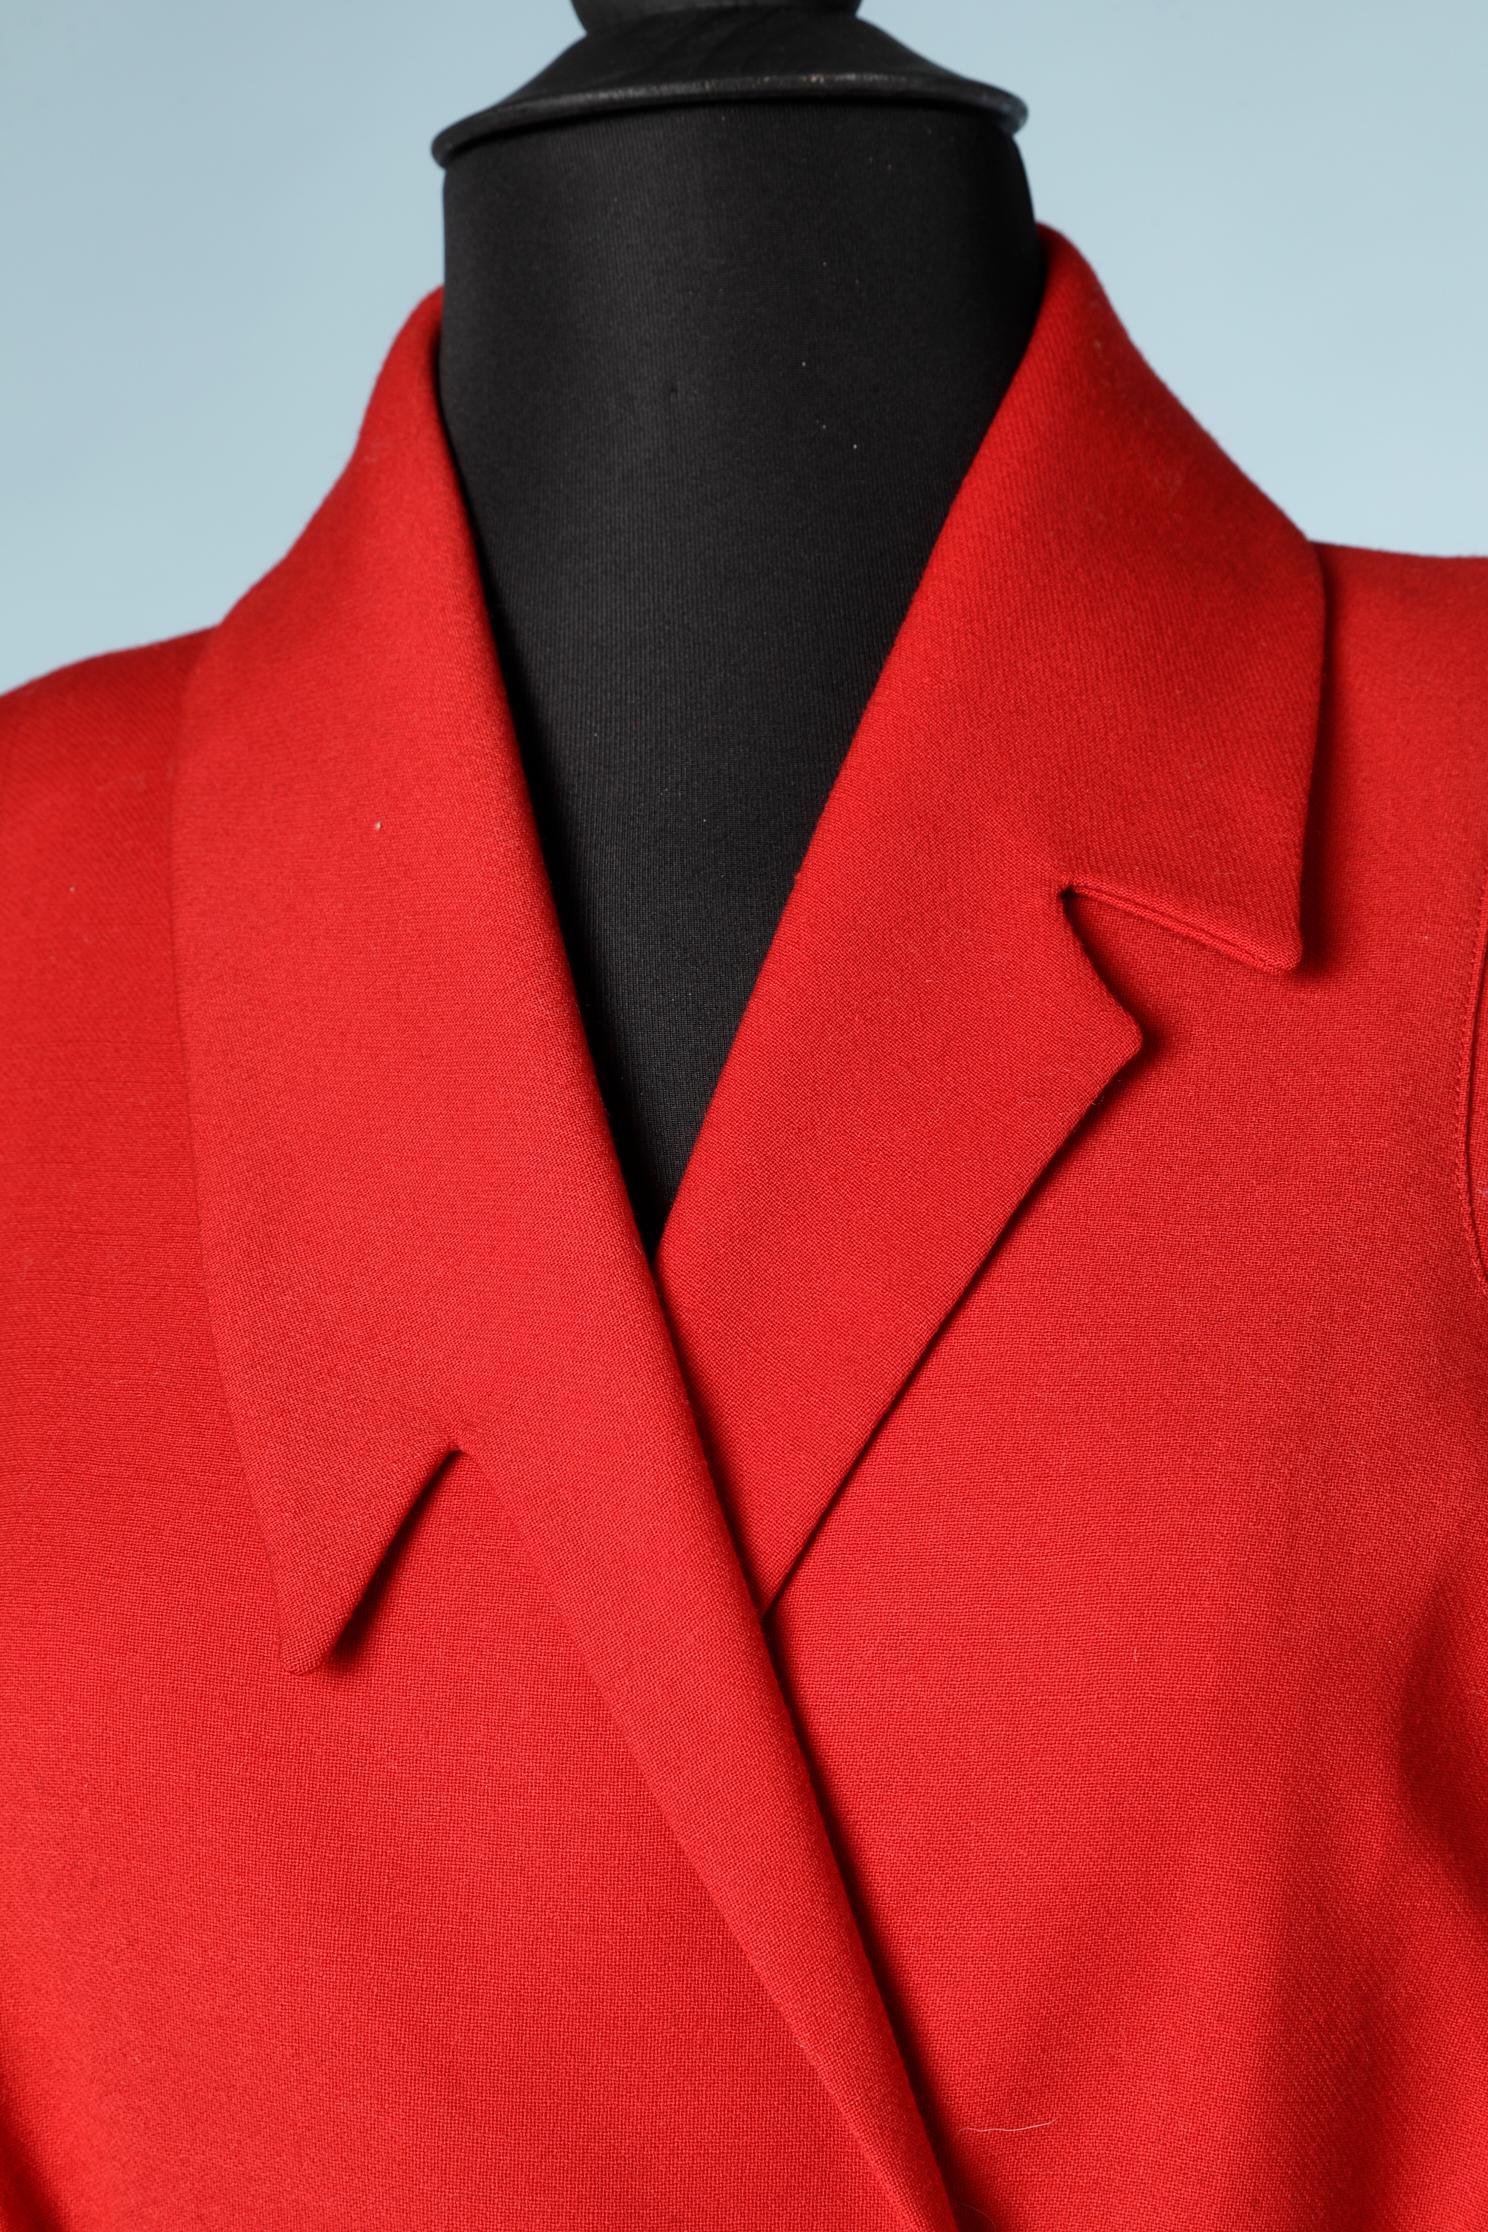 Red wool jacket with asymmetrical collar and silver buckles belt.
Size: 42 ( Fr)  12 (Us)